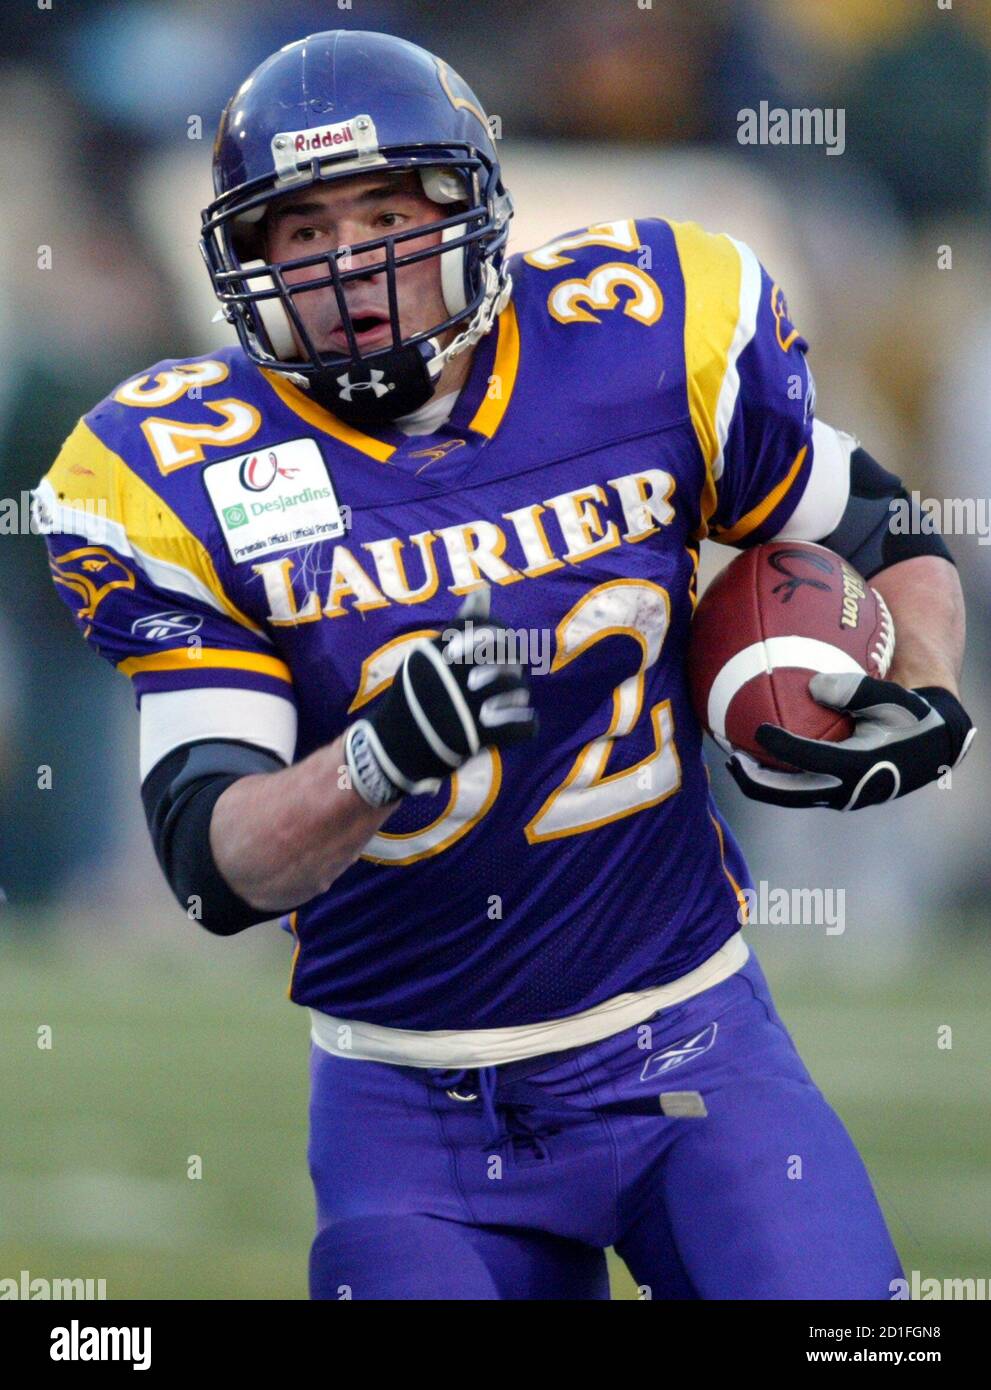 Wilfred Laurier High Resolution Stock Photography And Images Alamy